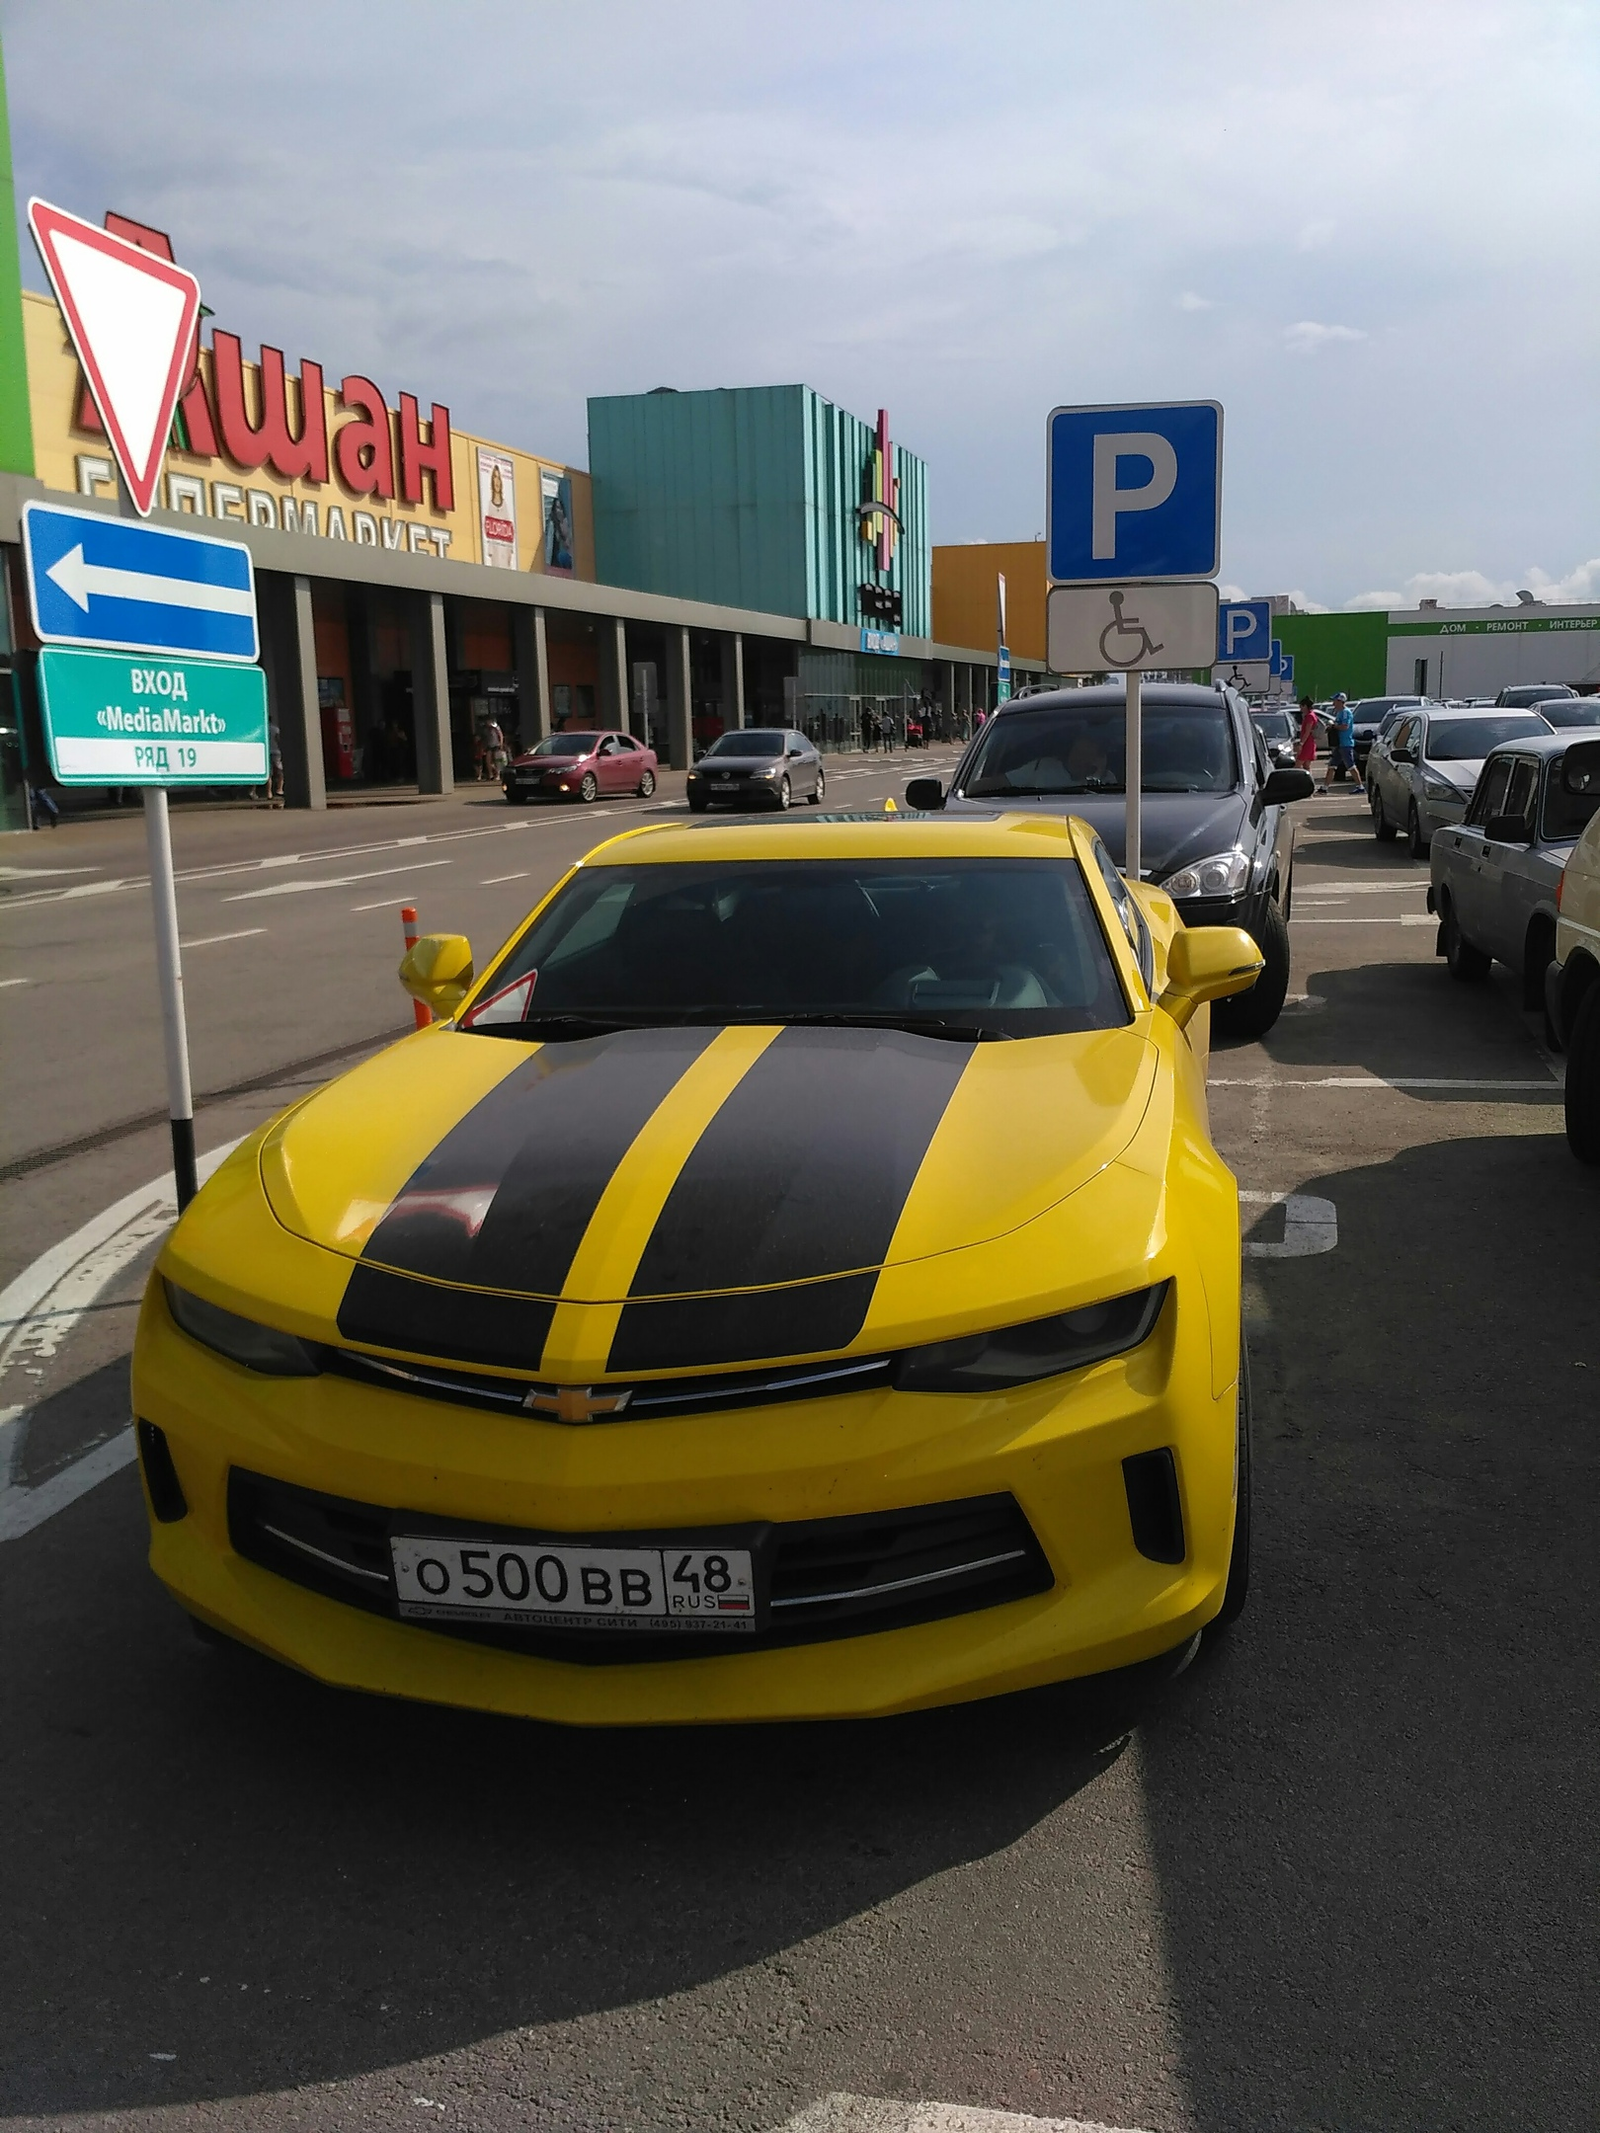 Disabled... on the head - My, Voronezh, Disabled person, Hail, Parking